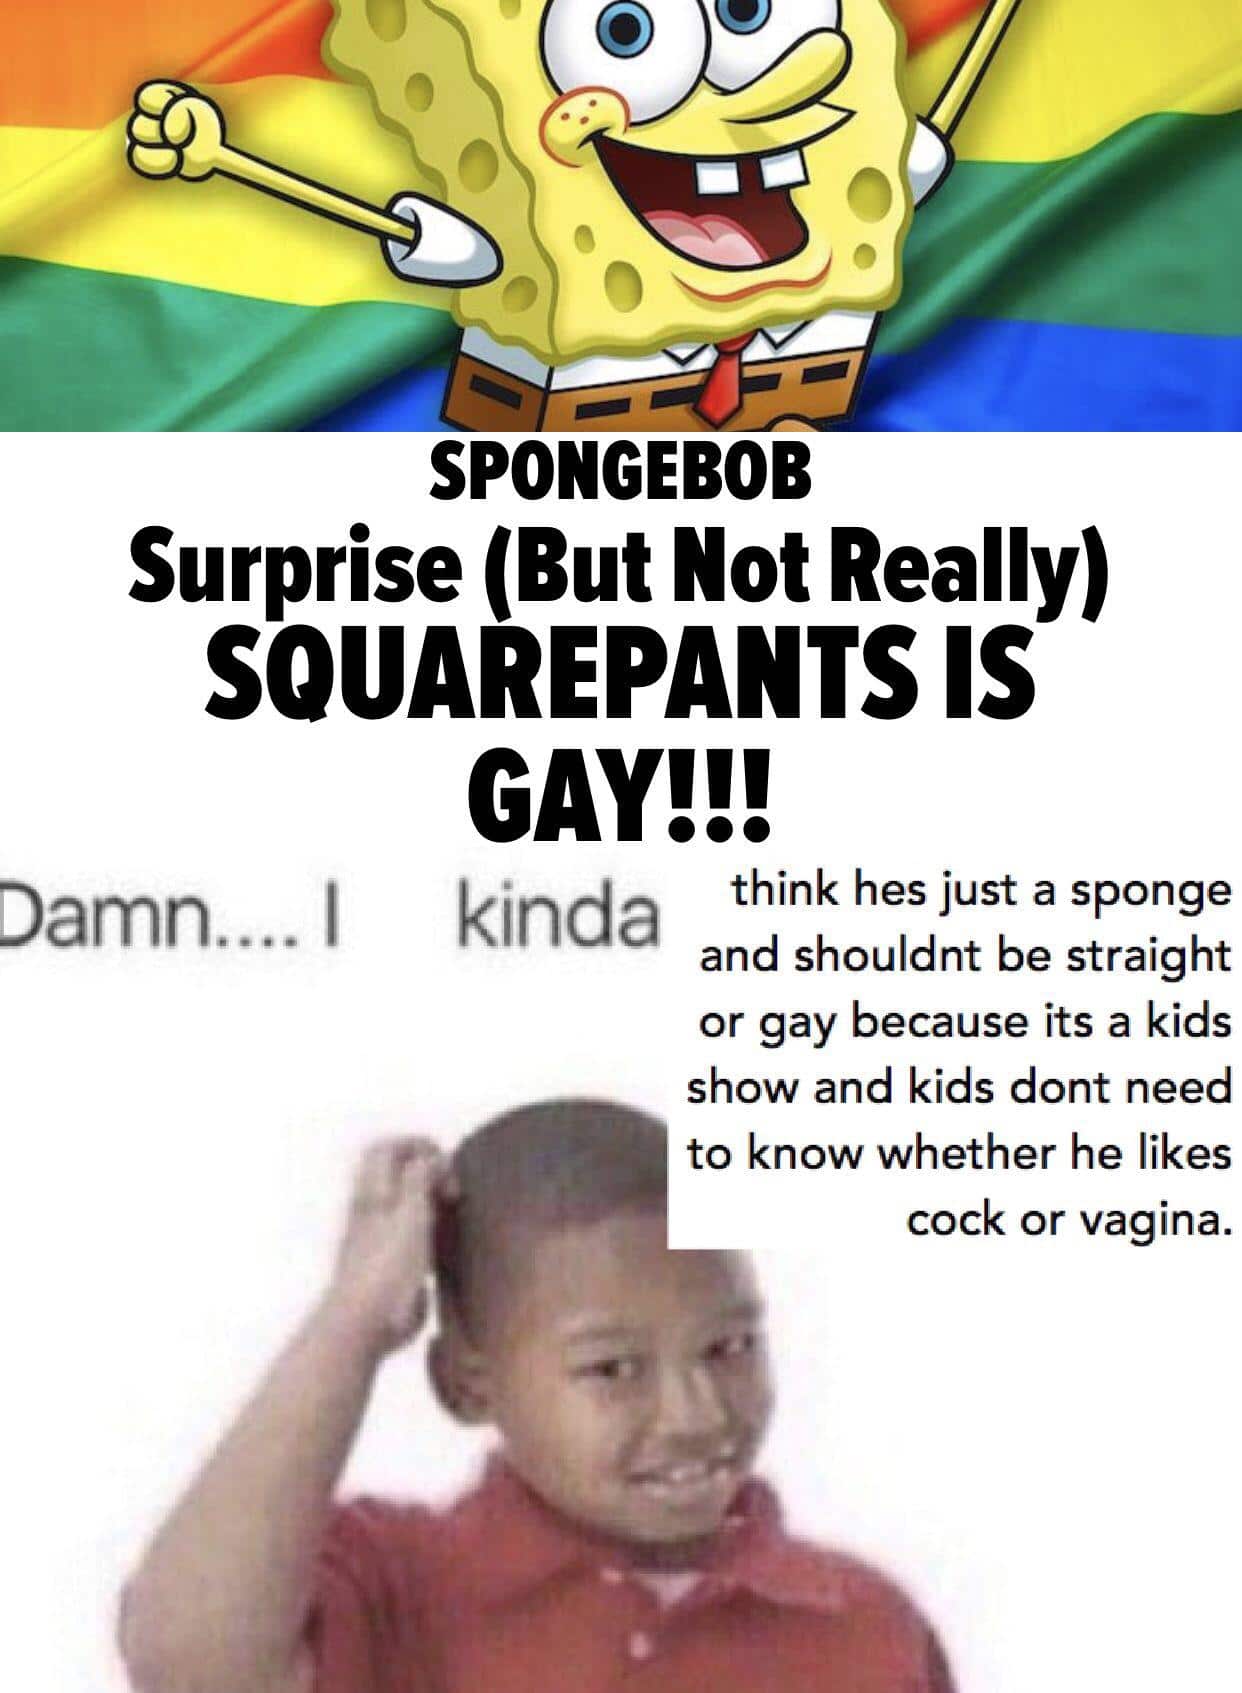 Dank, Sandy, LGBT, Spongebob, Nickelodeon, LGBTQ Dank Memes Dank, Sandy, LGBT, Spongebob, Nickelodeon, LGBTQ text: SPONGEBOB Surprise (But Not Really) SQUAREPANTS IS GAY!!! Damn.... I kinda think hes just a sponge and shouldnt be straight or gay because its a kids show and kids dont need to know whether he likes cock or vagina. 